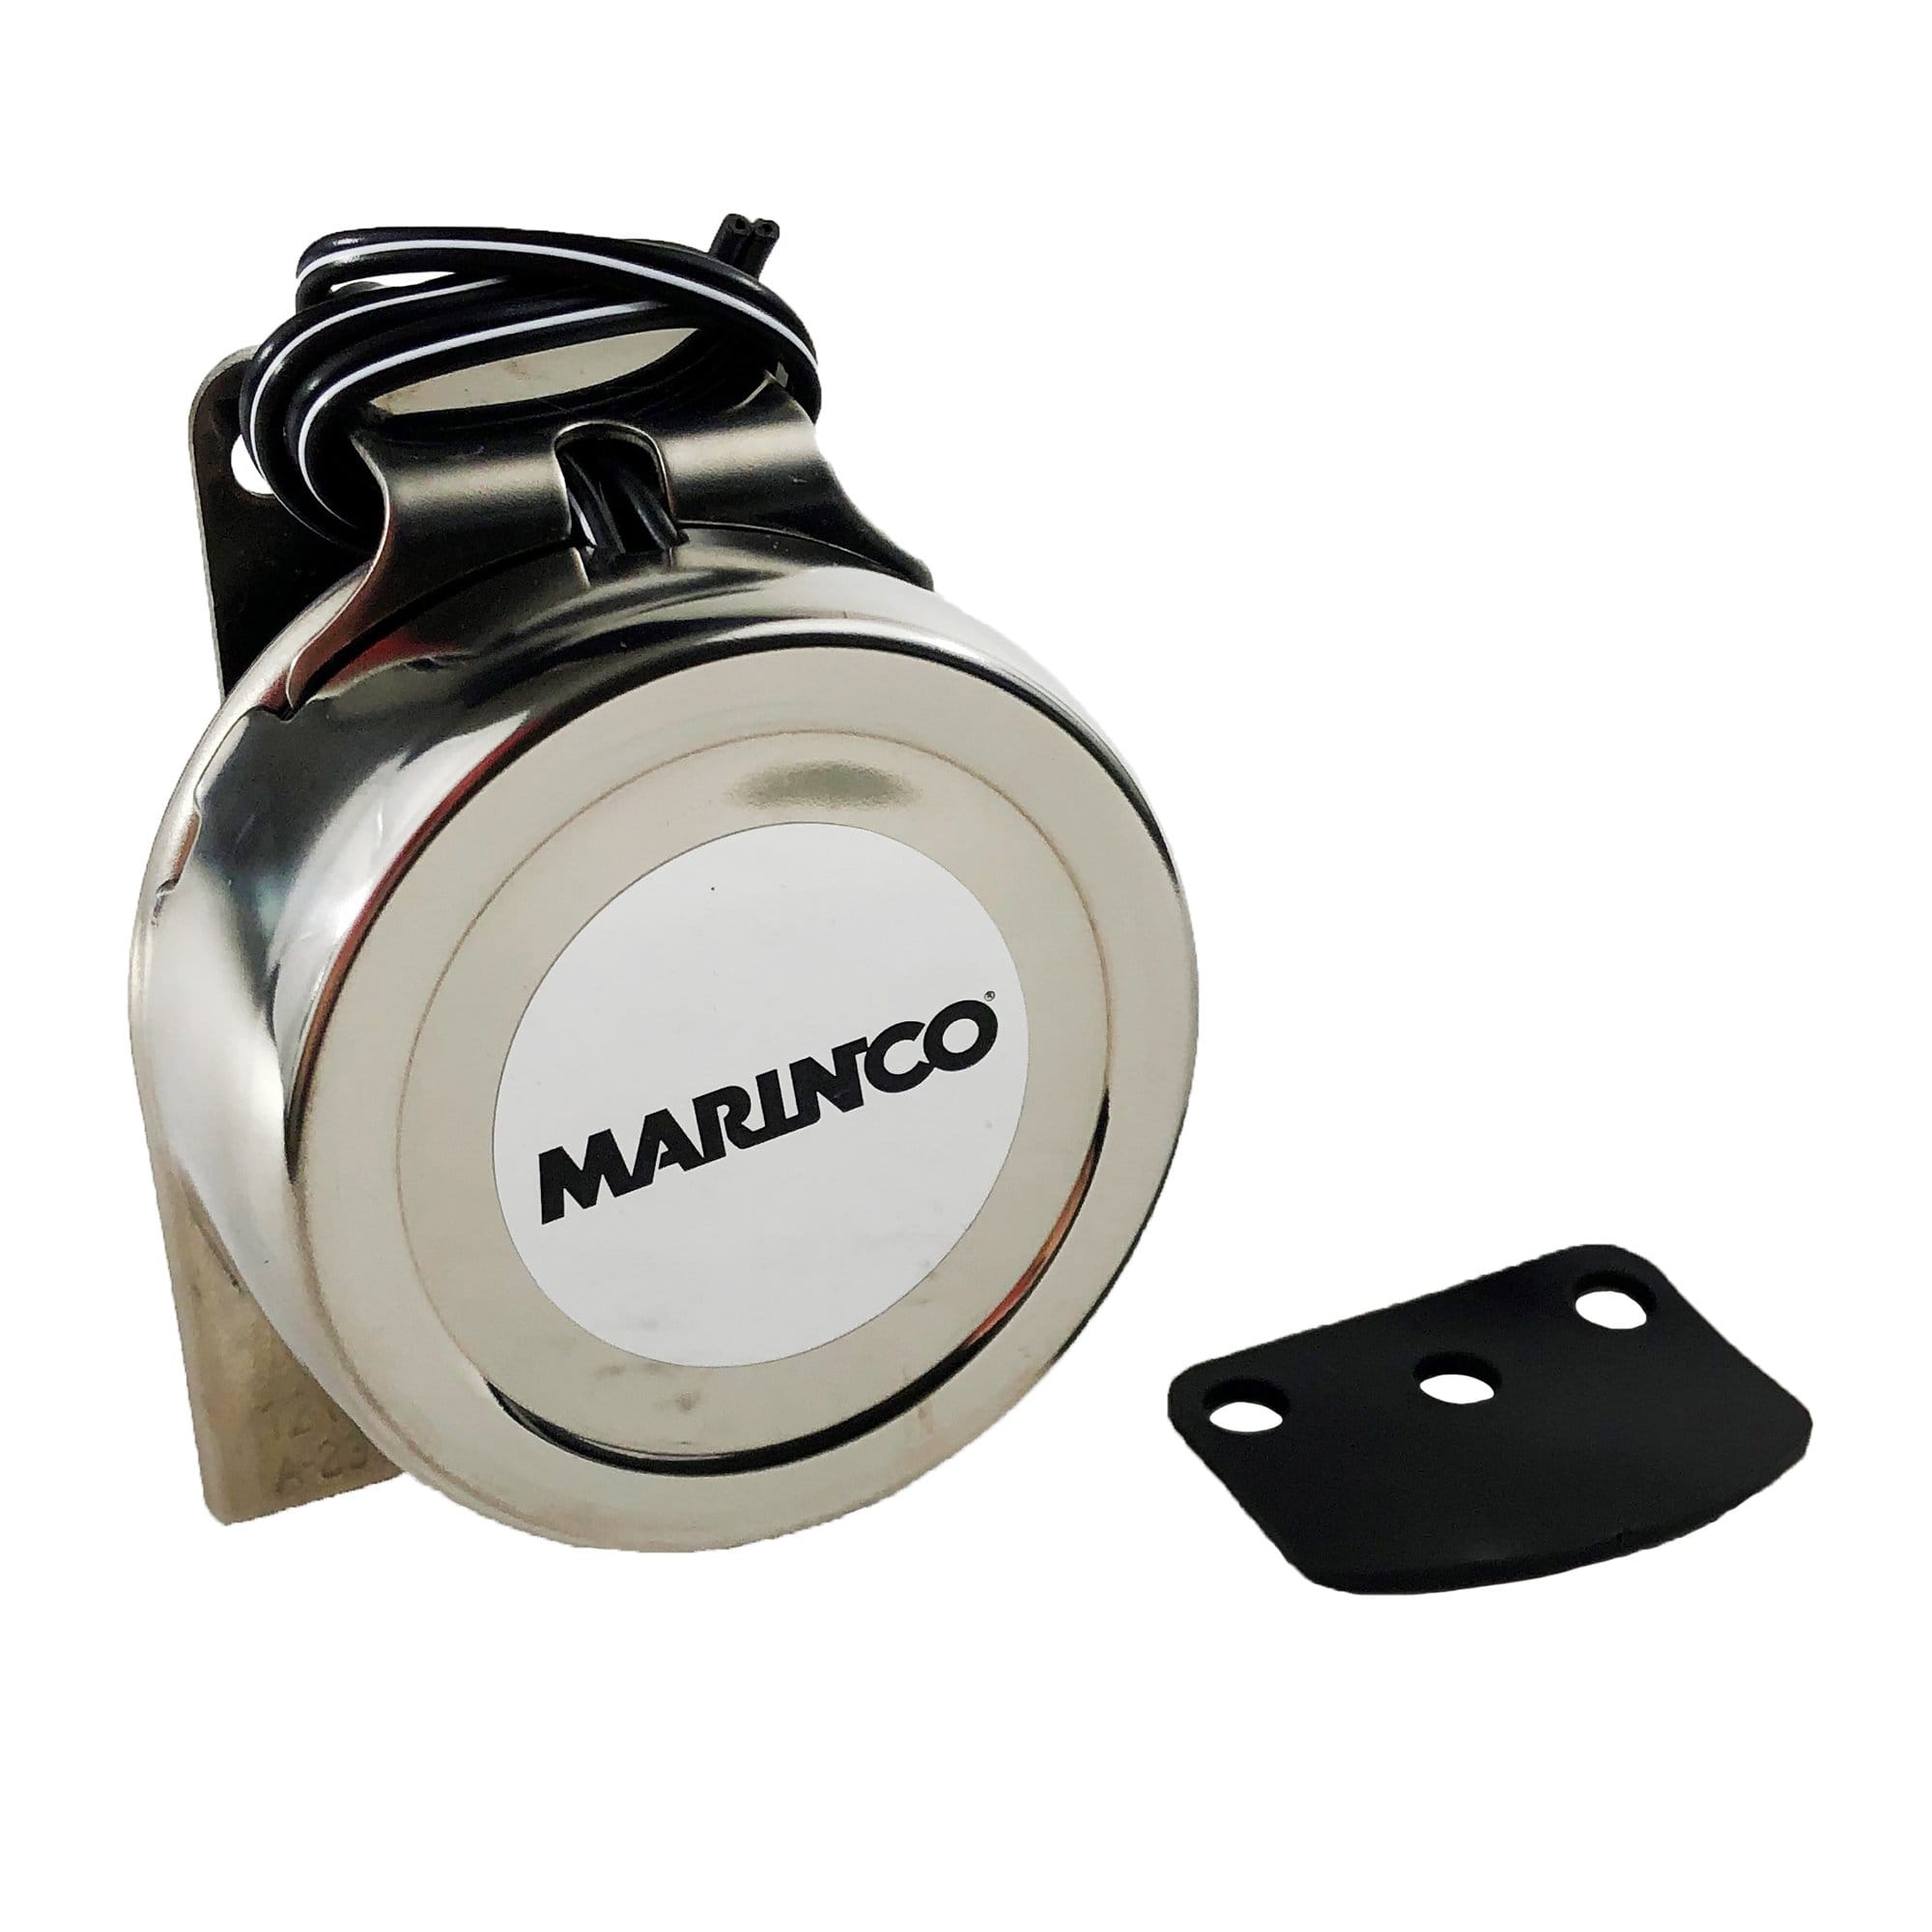 Power Products Marinco 10035 Mini Compact Electric Horn 12V